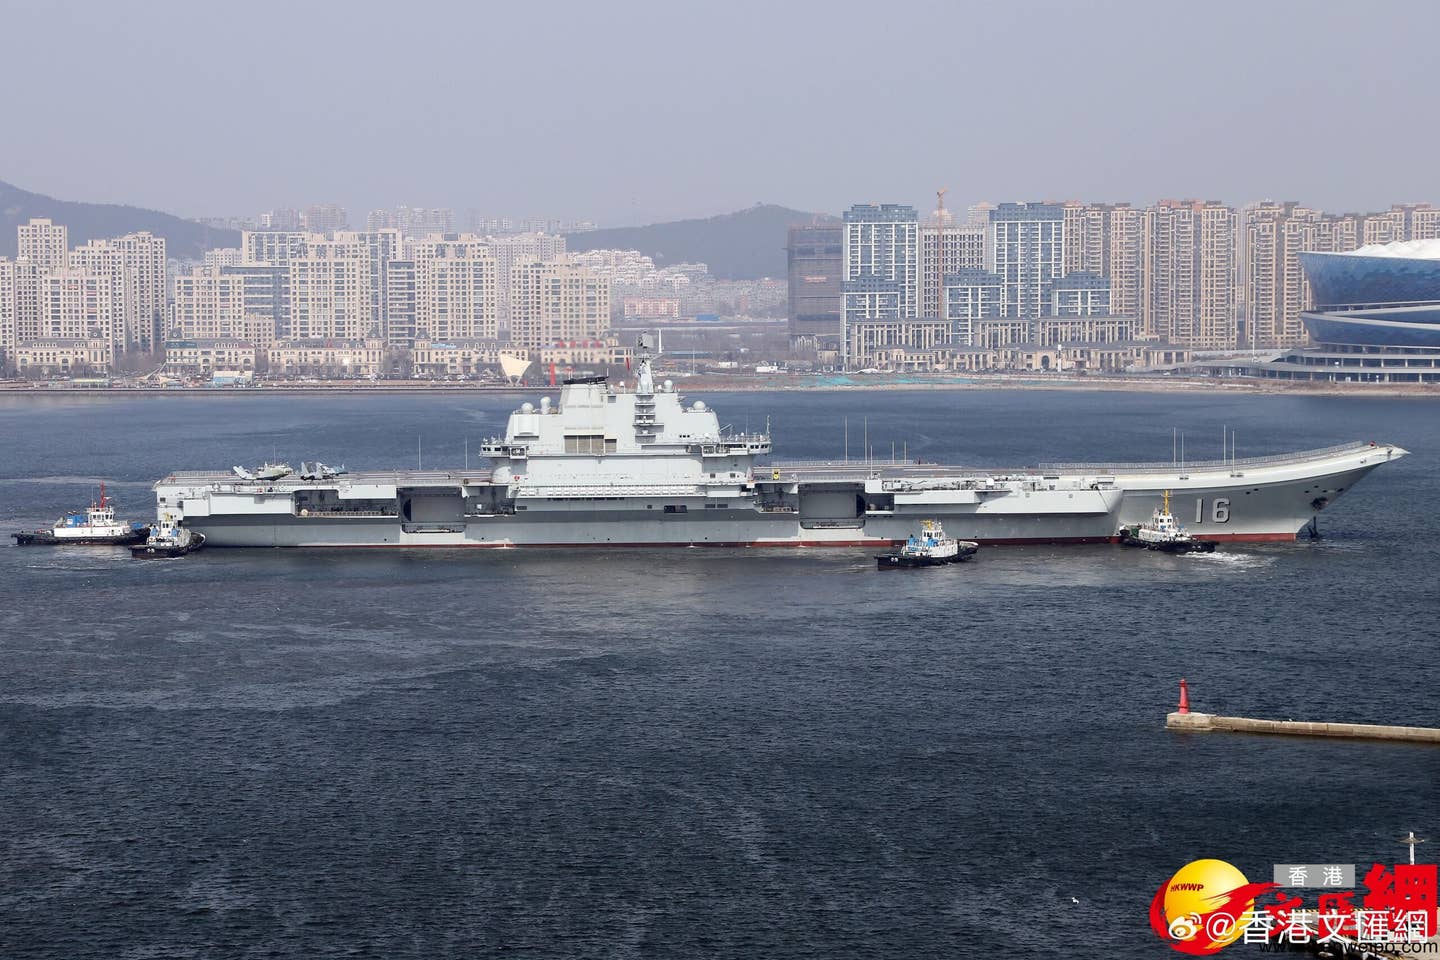 The <em>Liaoning</em> heads out to sea with mockups of the J-35 and a J-15 variant seen at the rear of the deck. <em>Chinese internet via X</em>